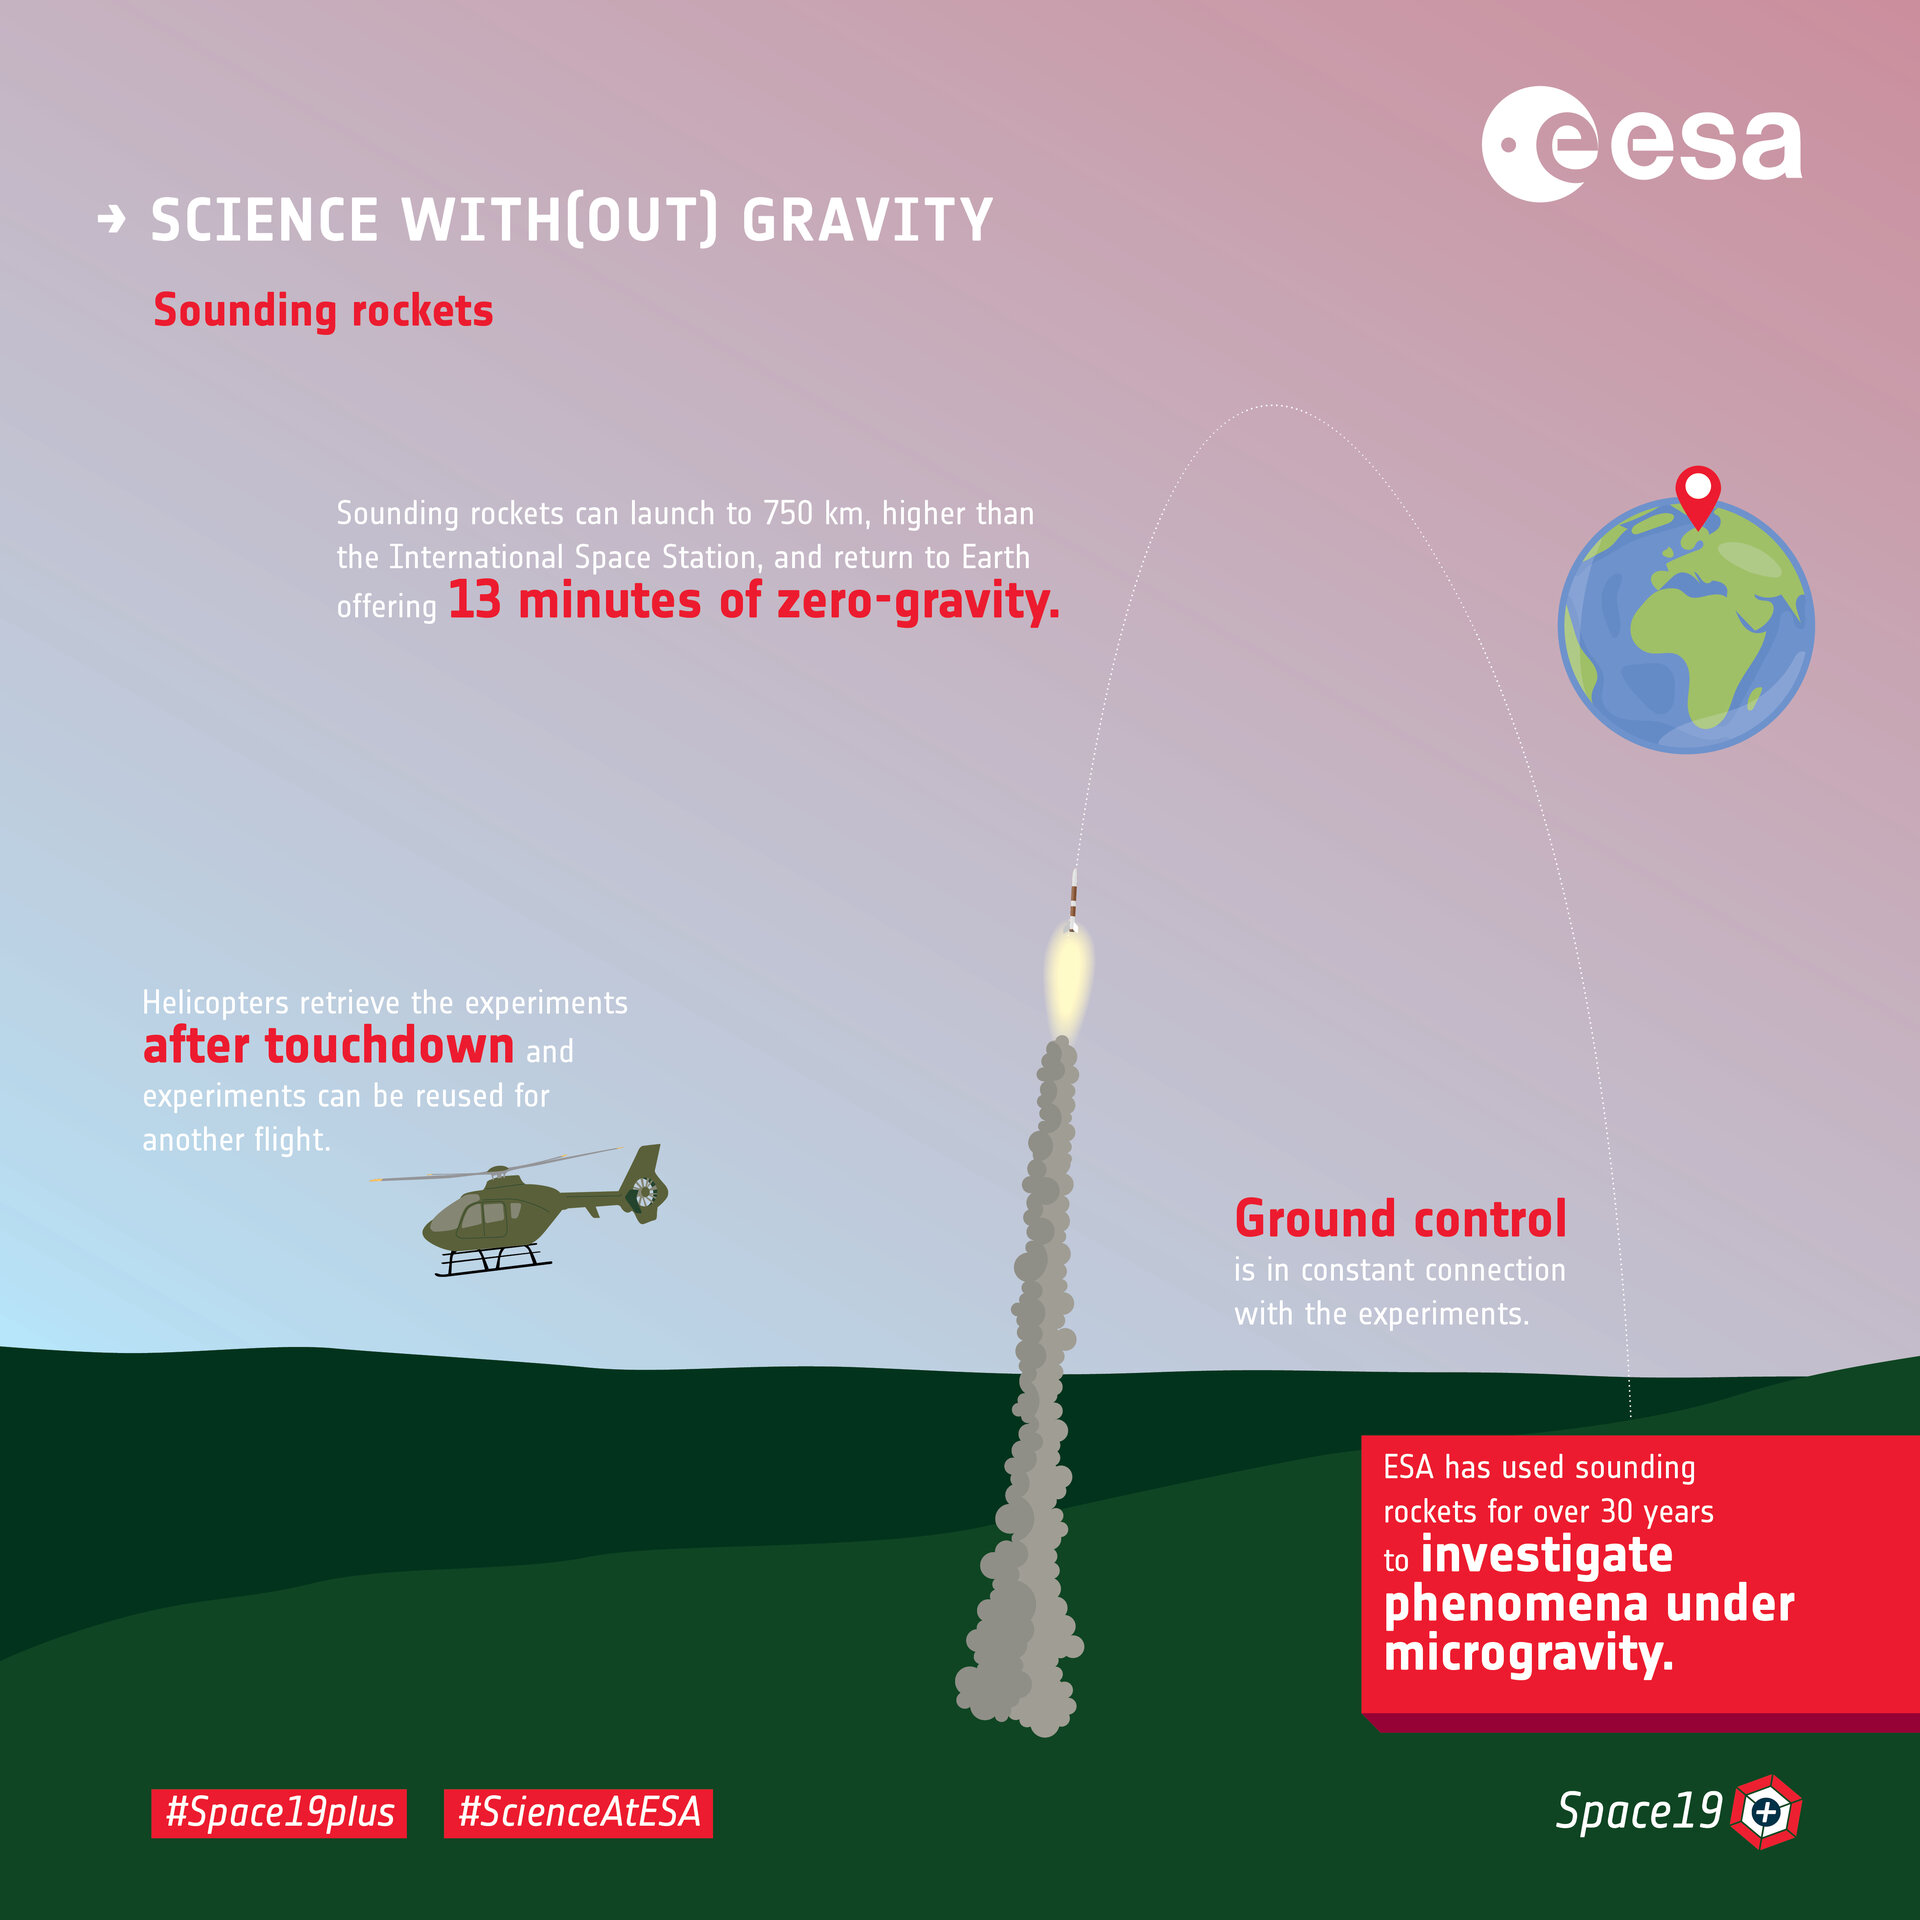 Science with(out) gravity  – sounding rockets